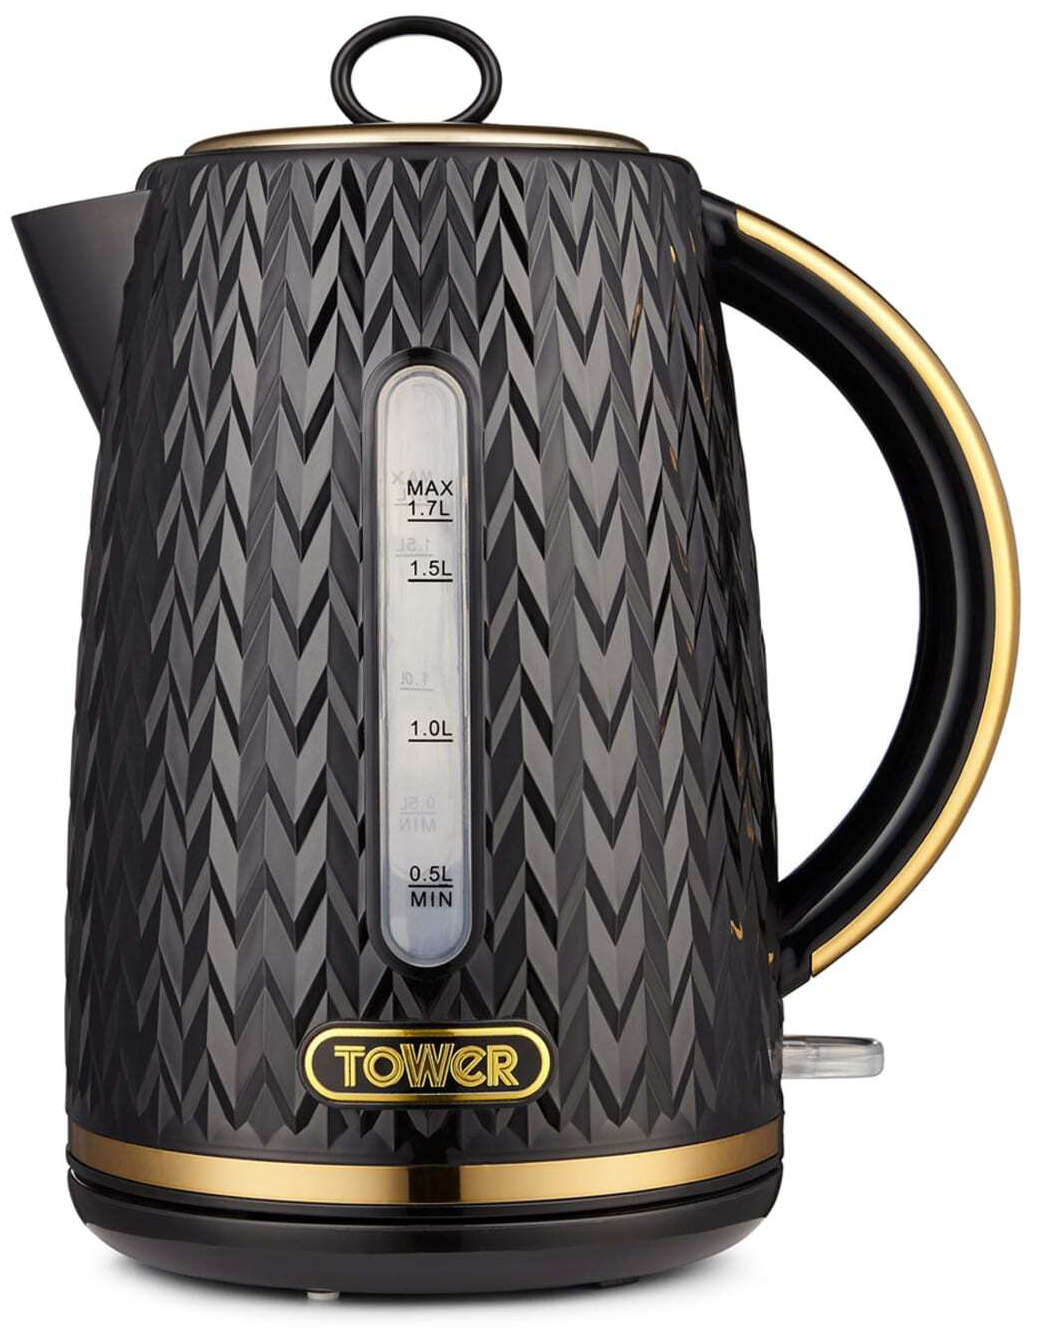 Tower Empire 3KW 1.7L Kettle - Black